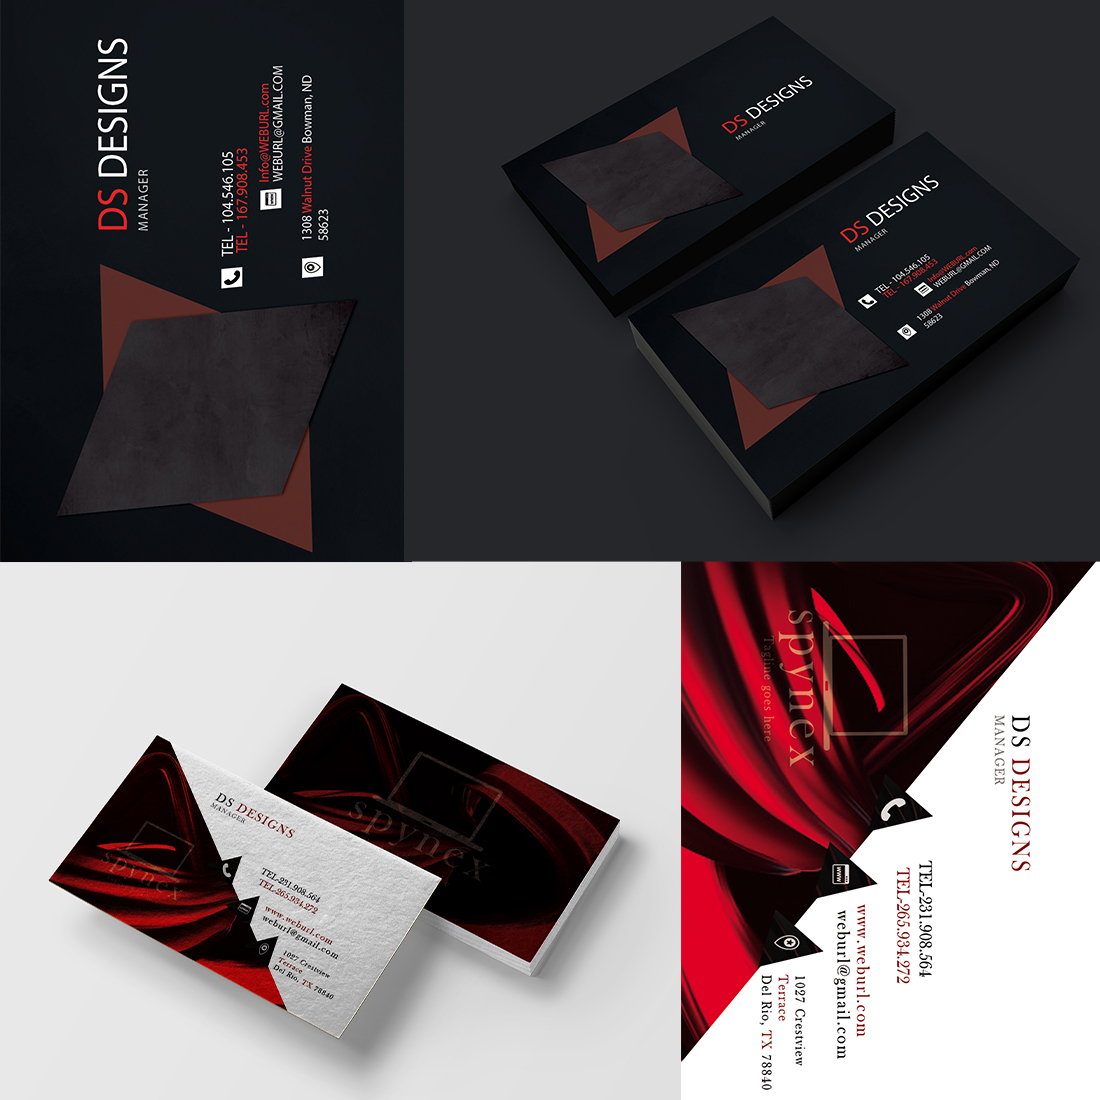 Professional and Creative 2 Business Card Bundle Designs cover image.